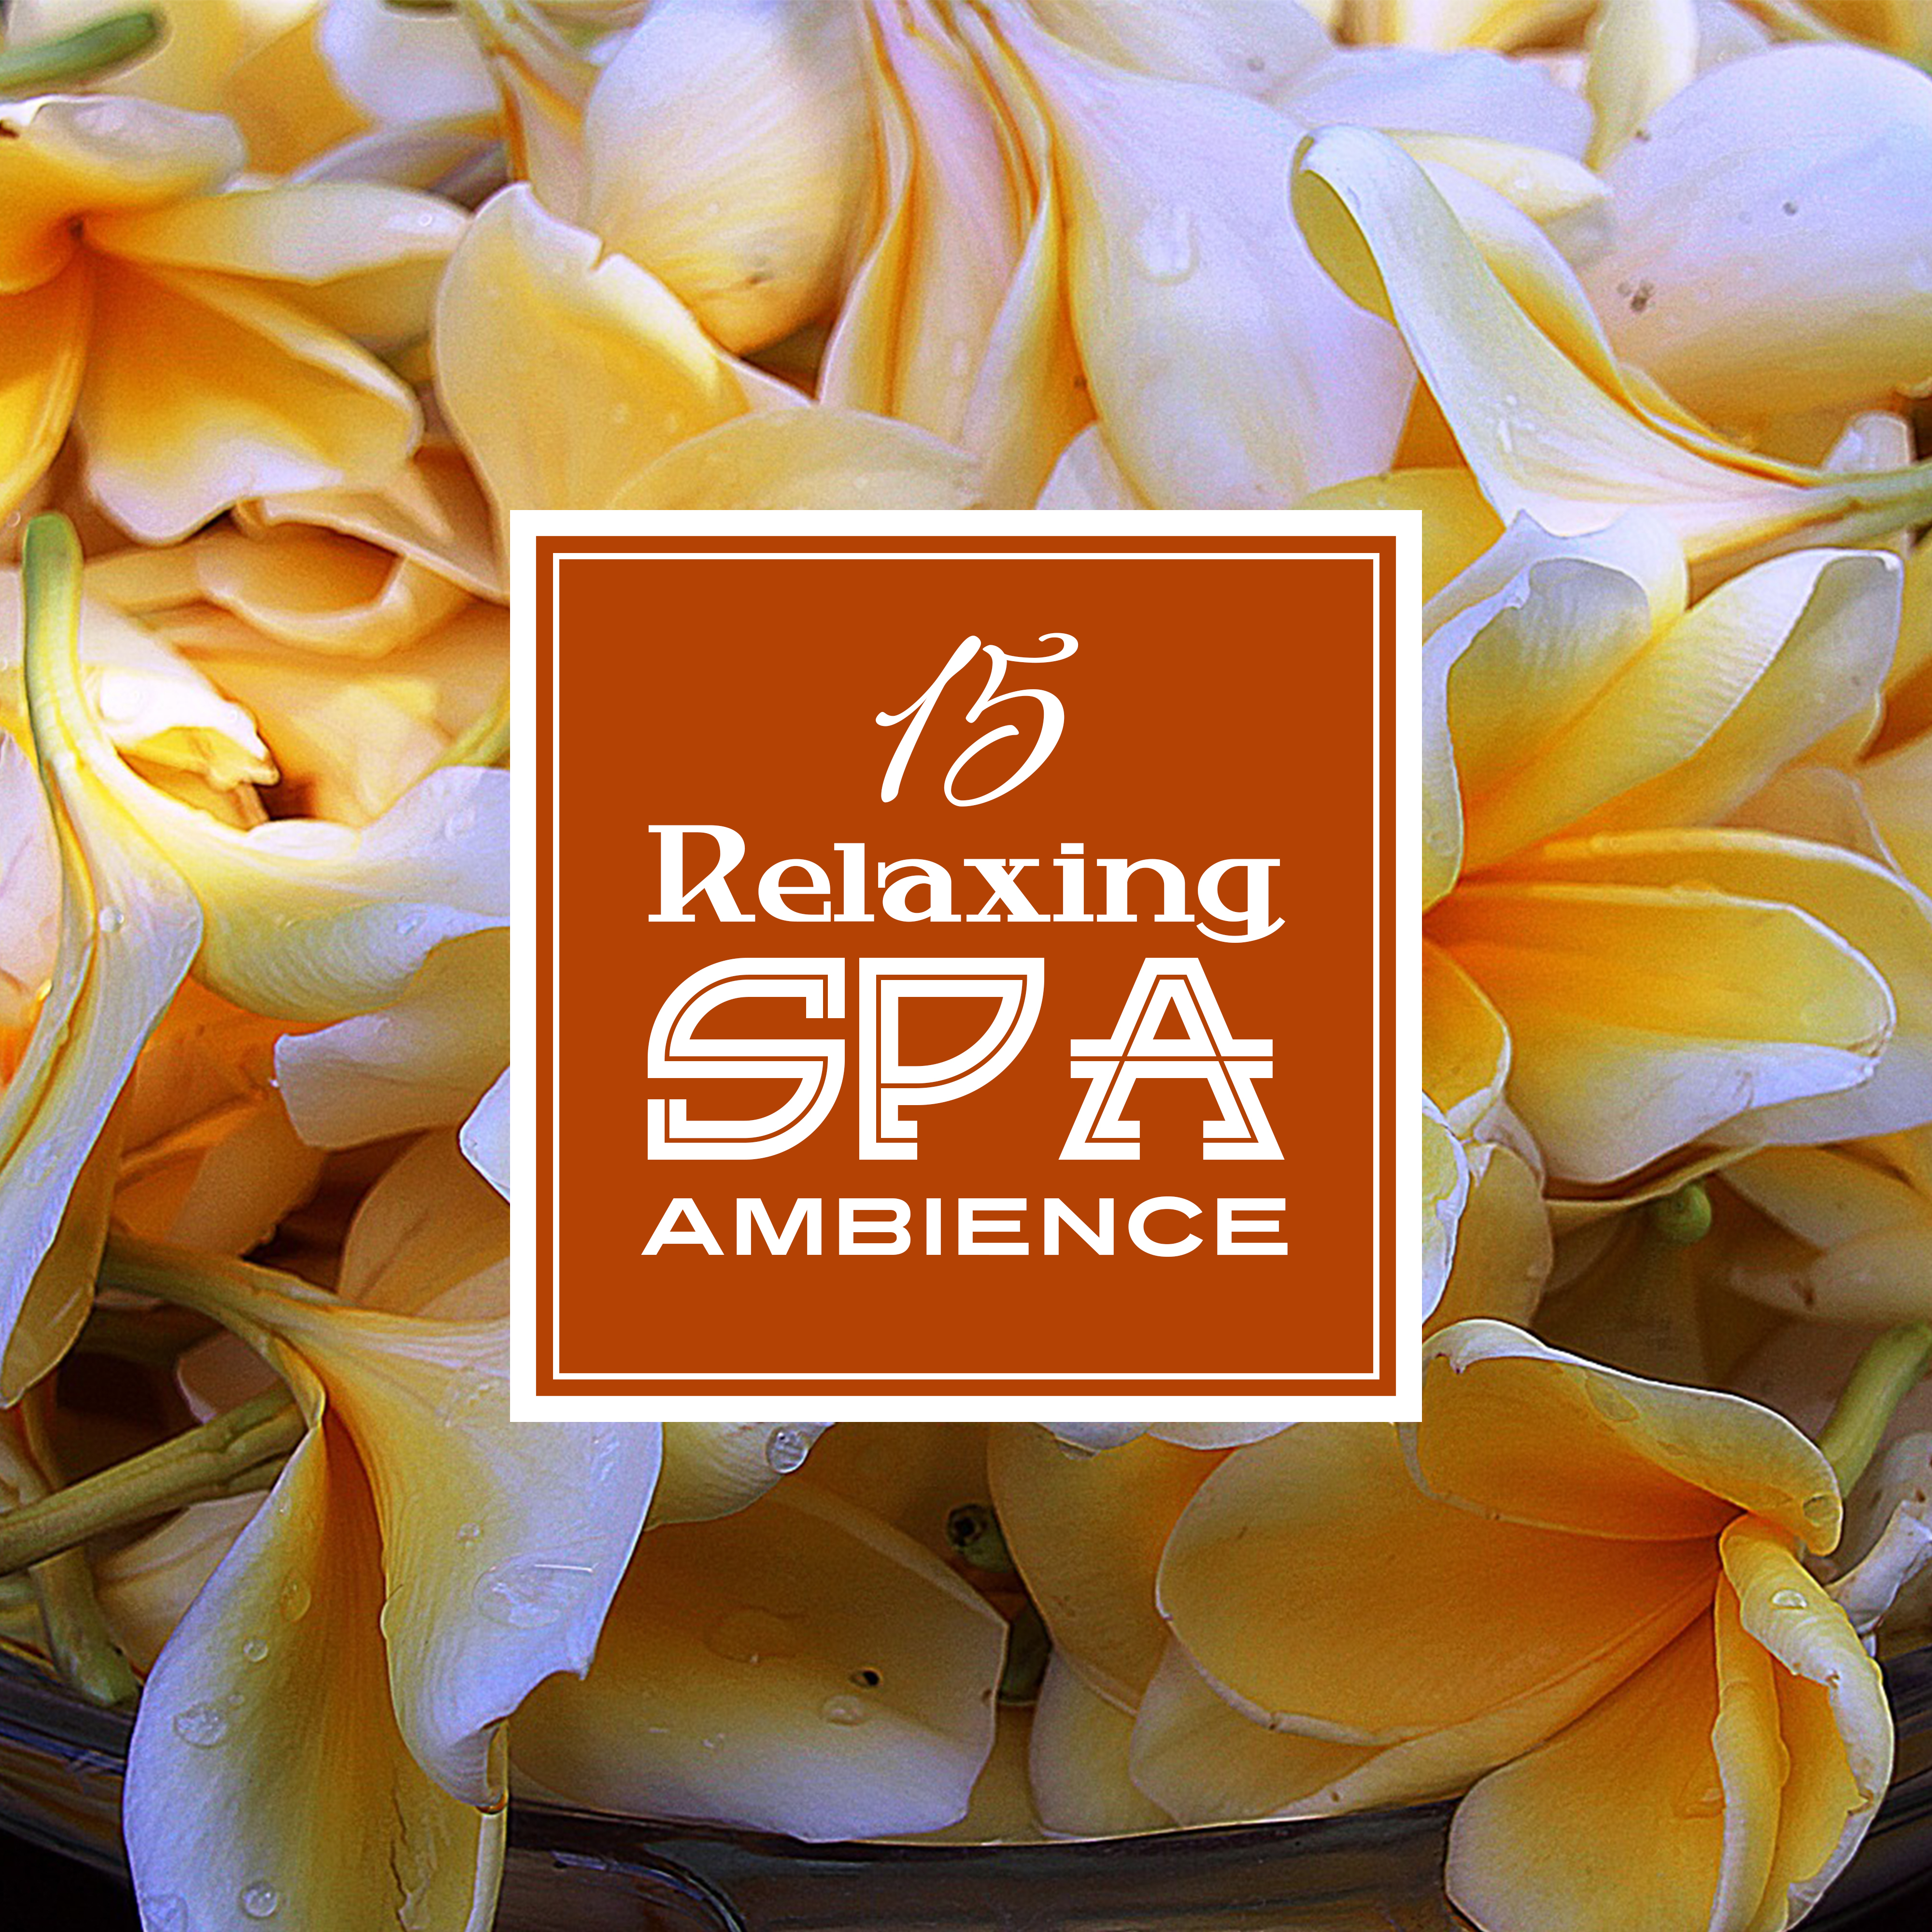 15 Relaxing Spa Ambience